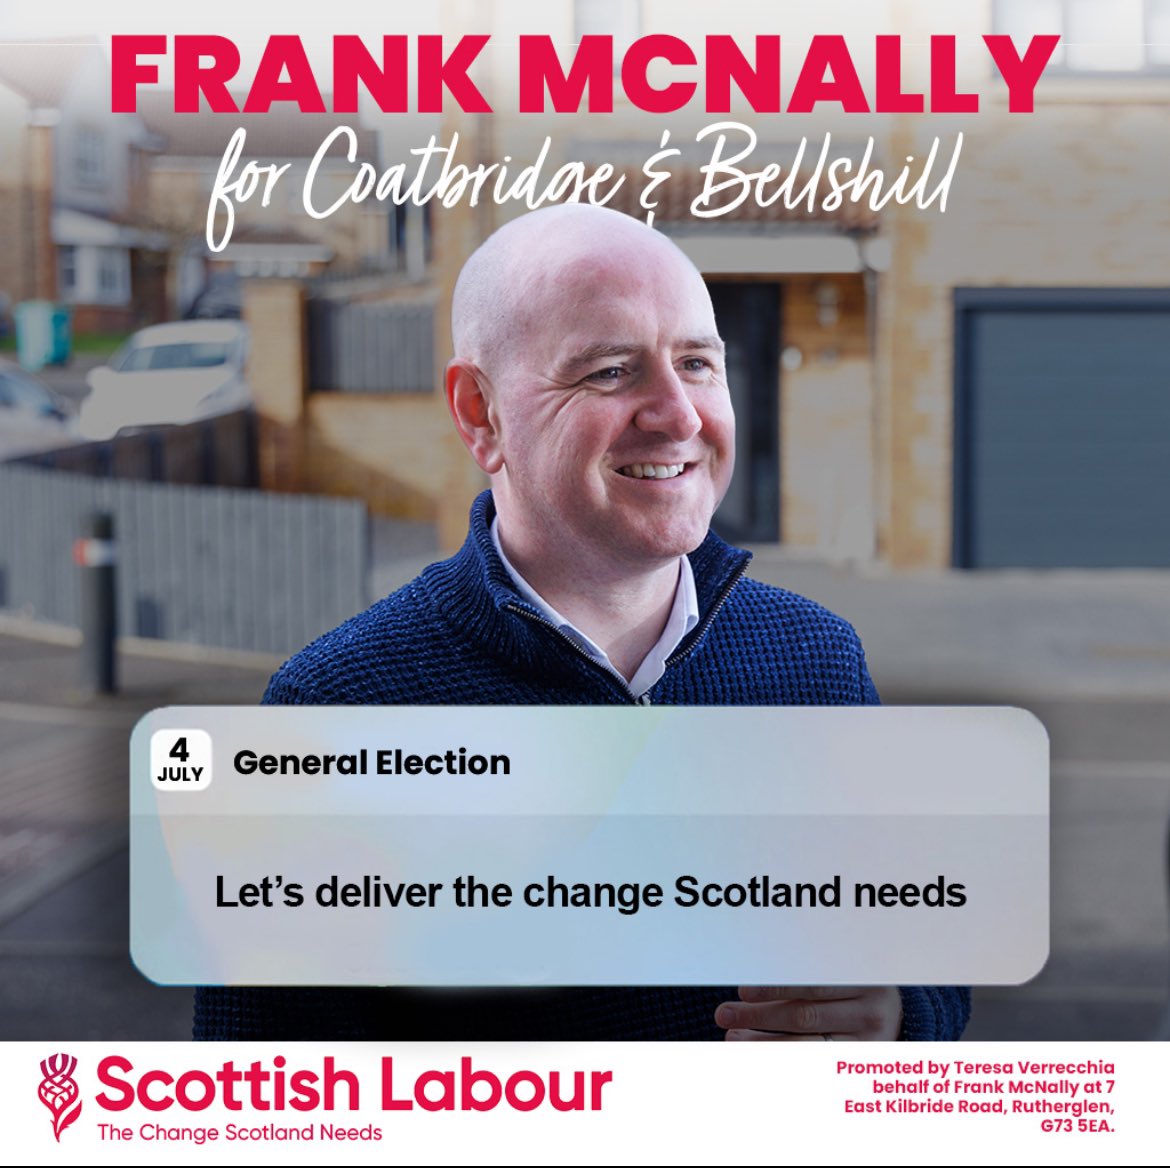 Reminder: If you haven’t already, put a date in your diaries! The general election is on July 4th and will be the most important in a generation. Vote Scottish Labour to deliver the change Scotland needs. #VoteScotLab24